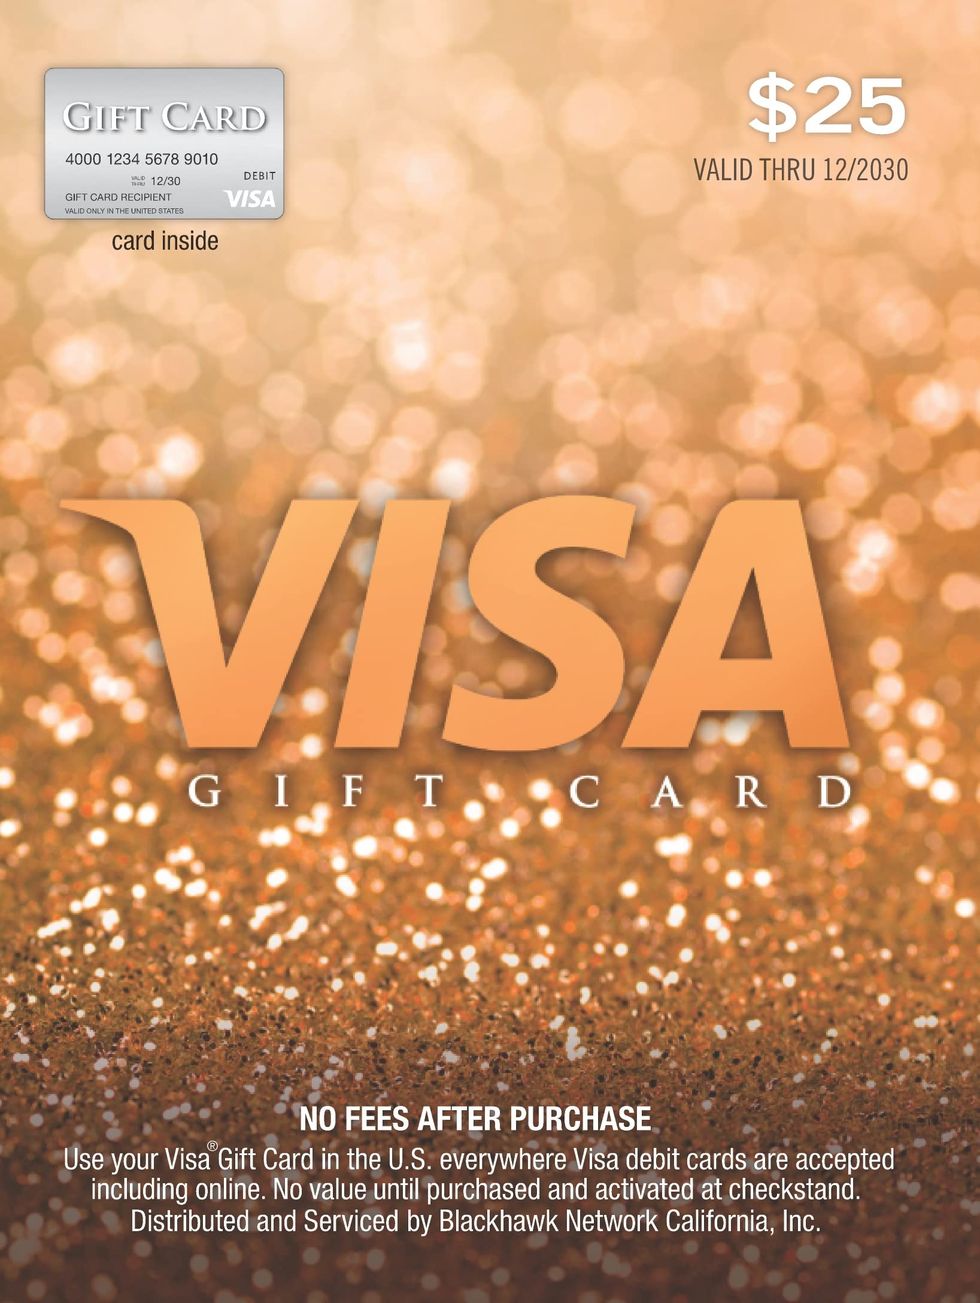 How to Check Your Visa Prepaid Card Balance